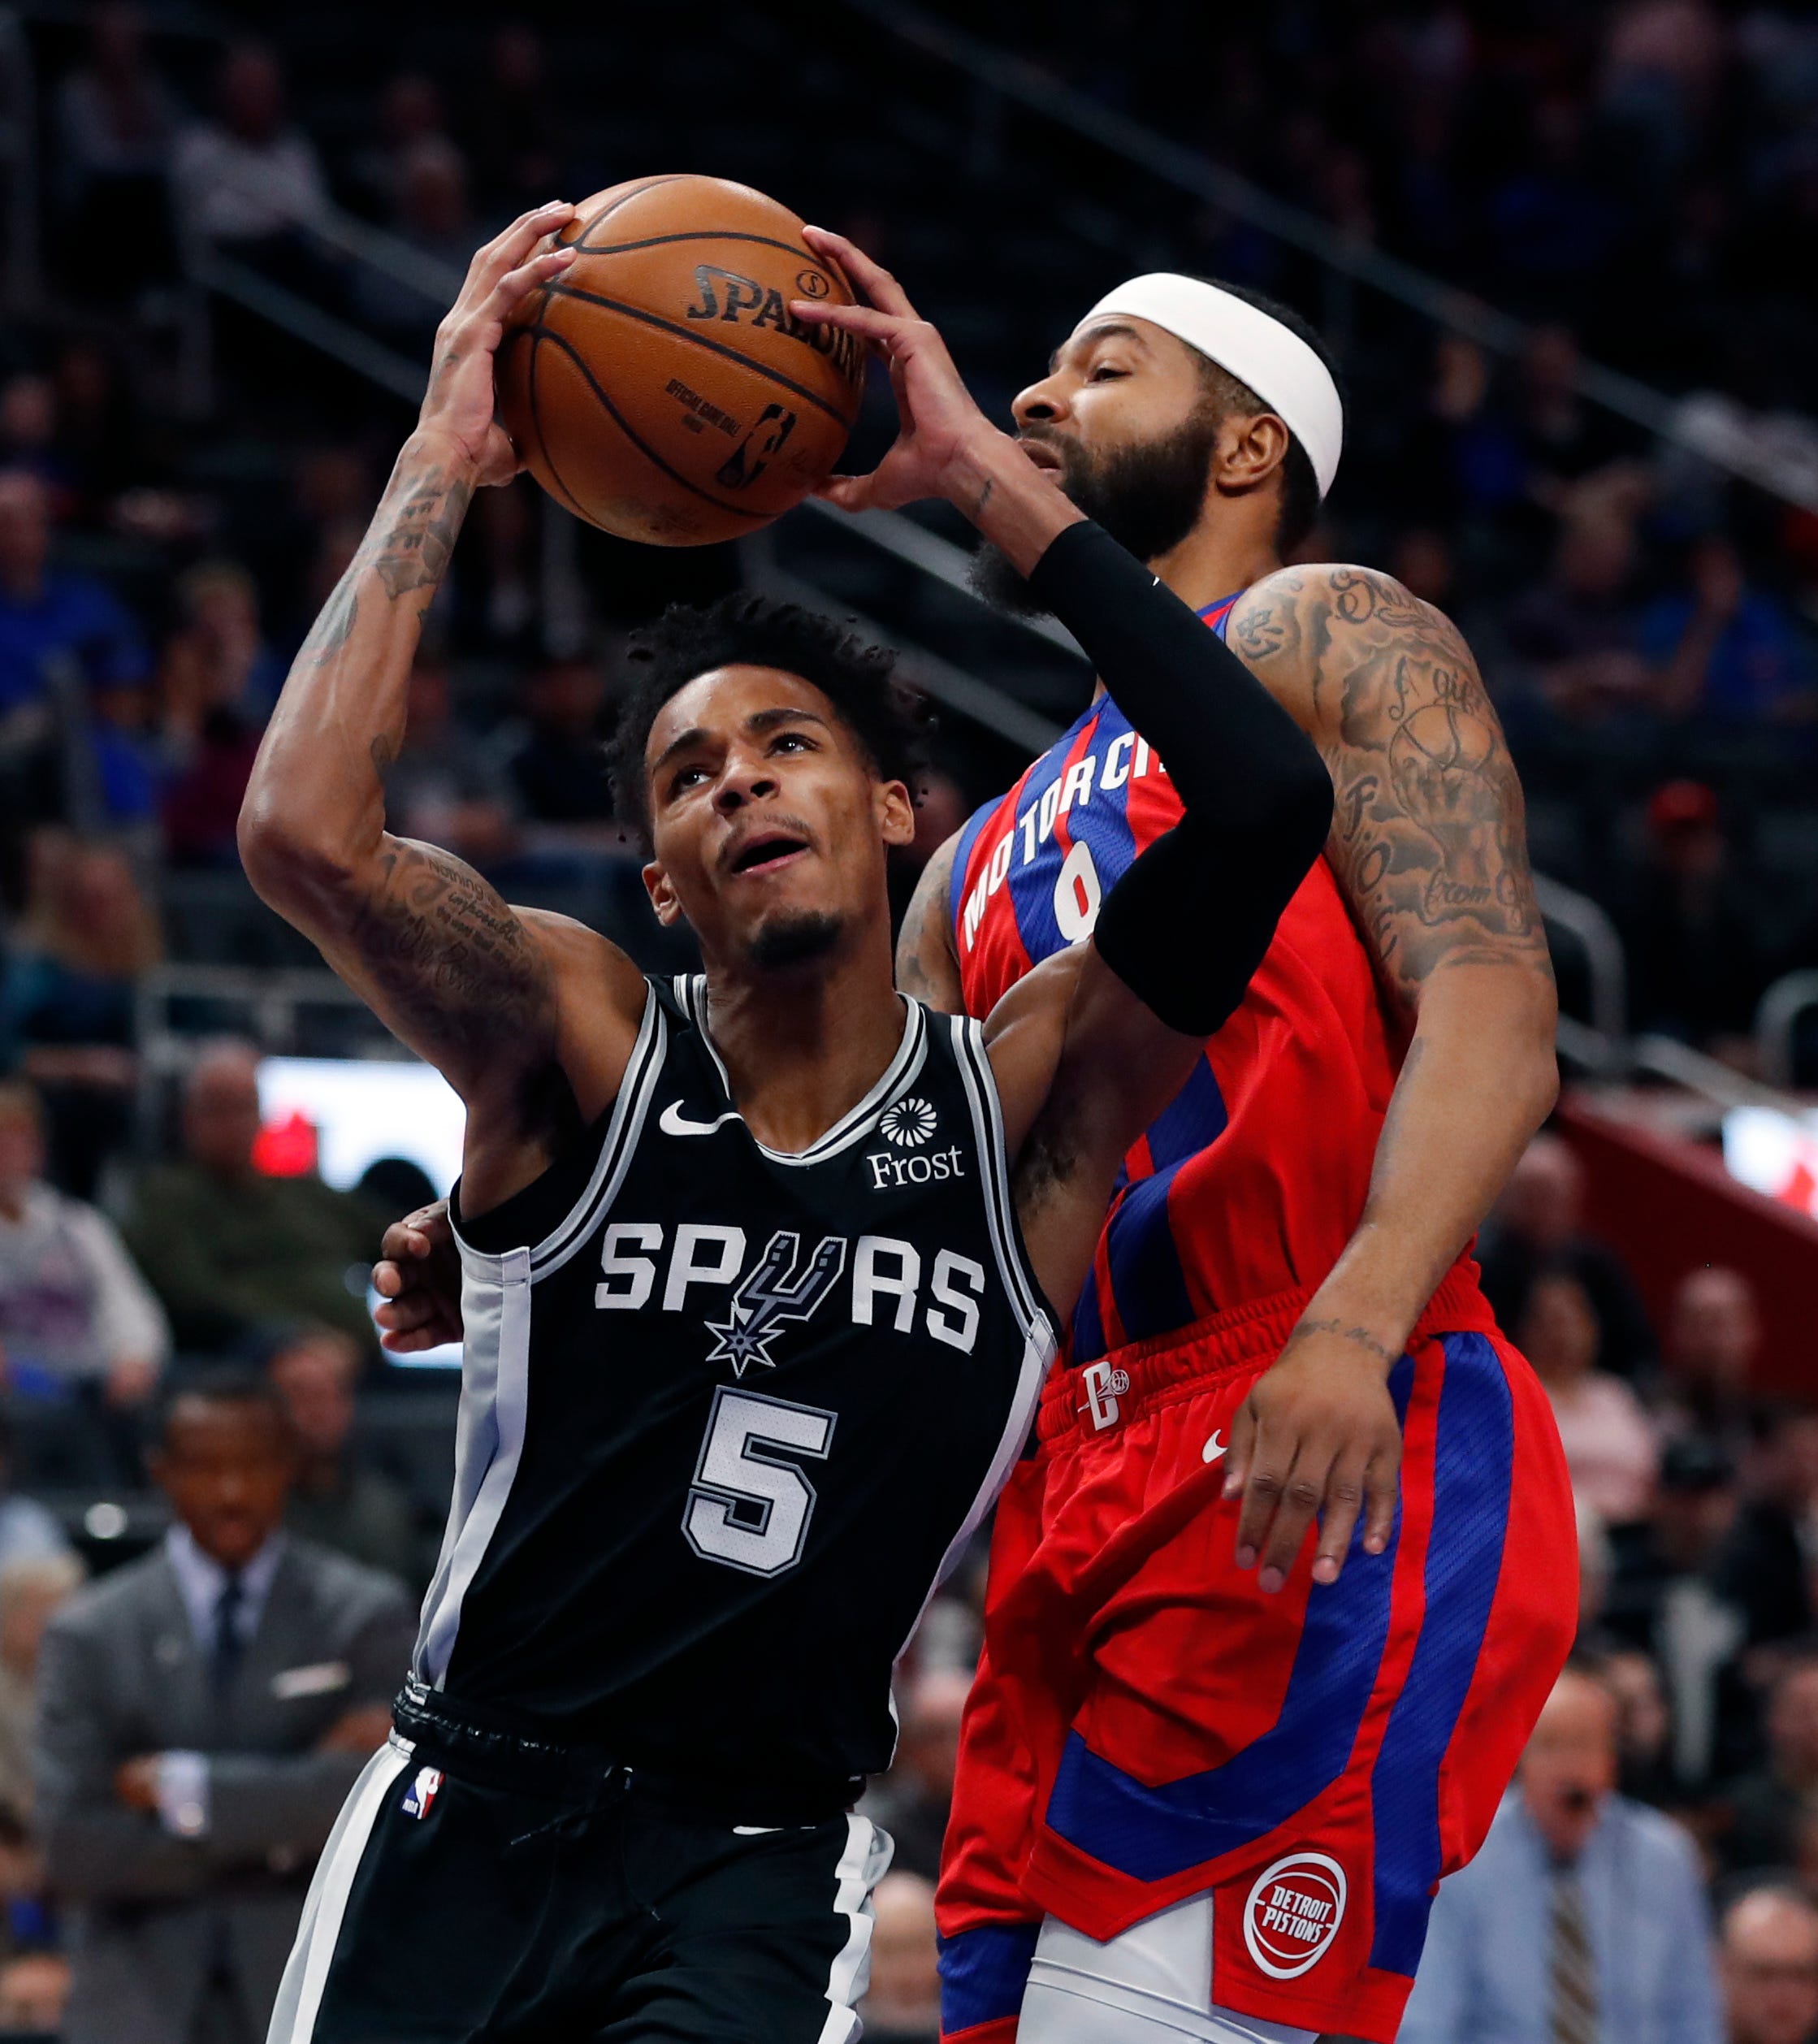 San Antonio Spurs guard Dejounte Murray (5) attempts a layup as Detroit Pistons forward Markieff Morris (8) defends during the first half.